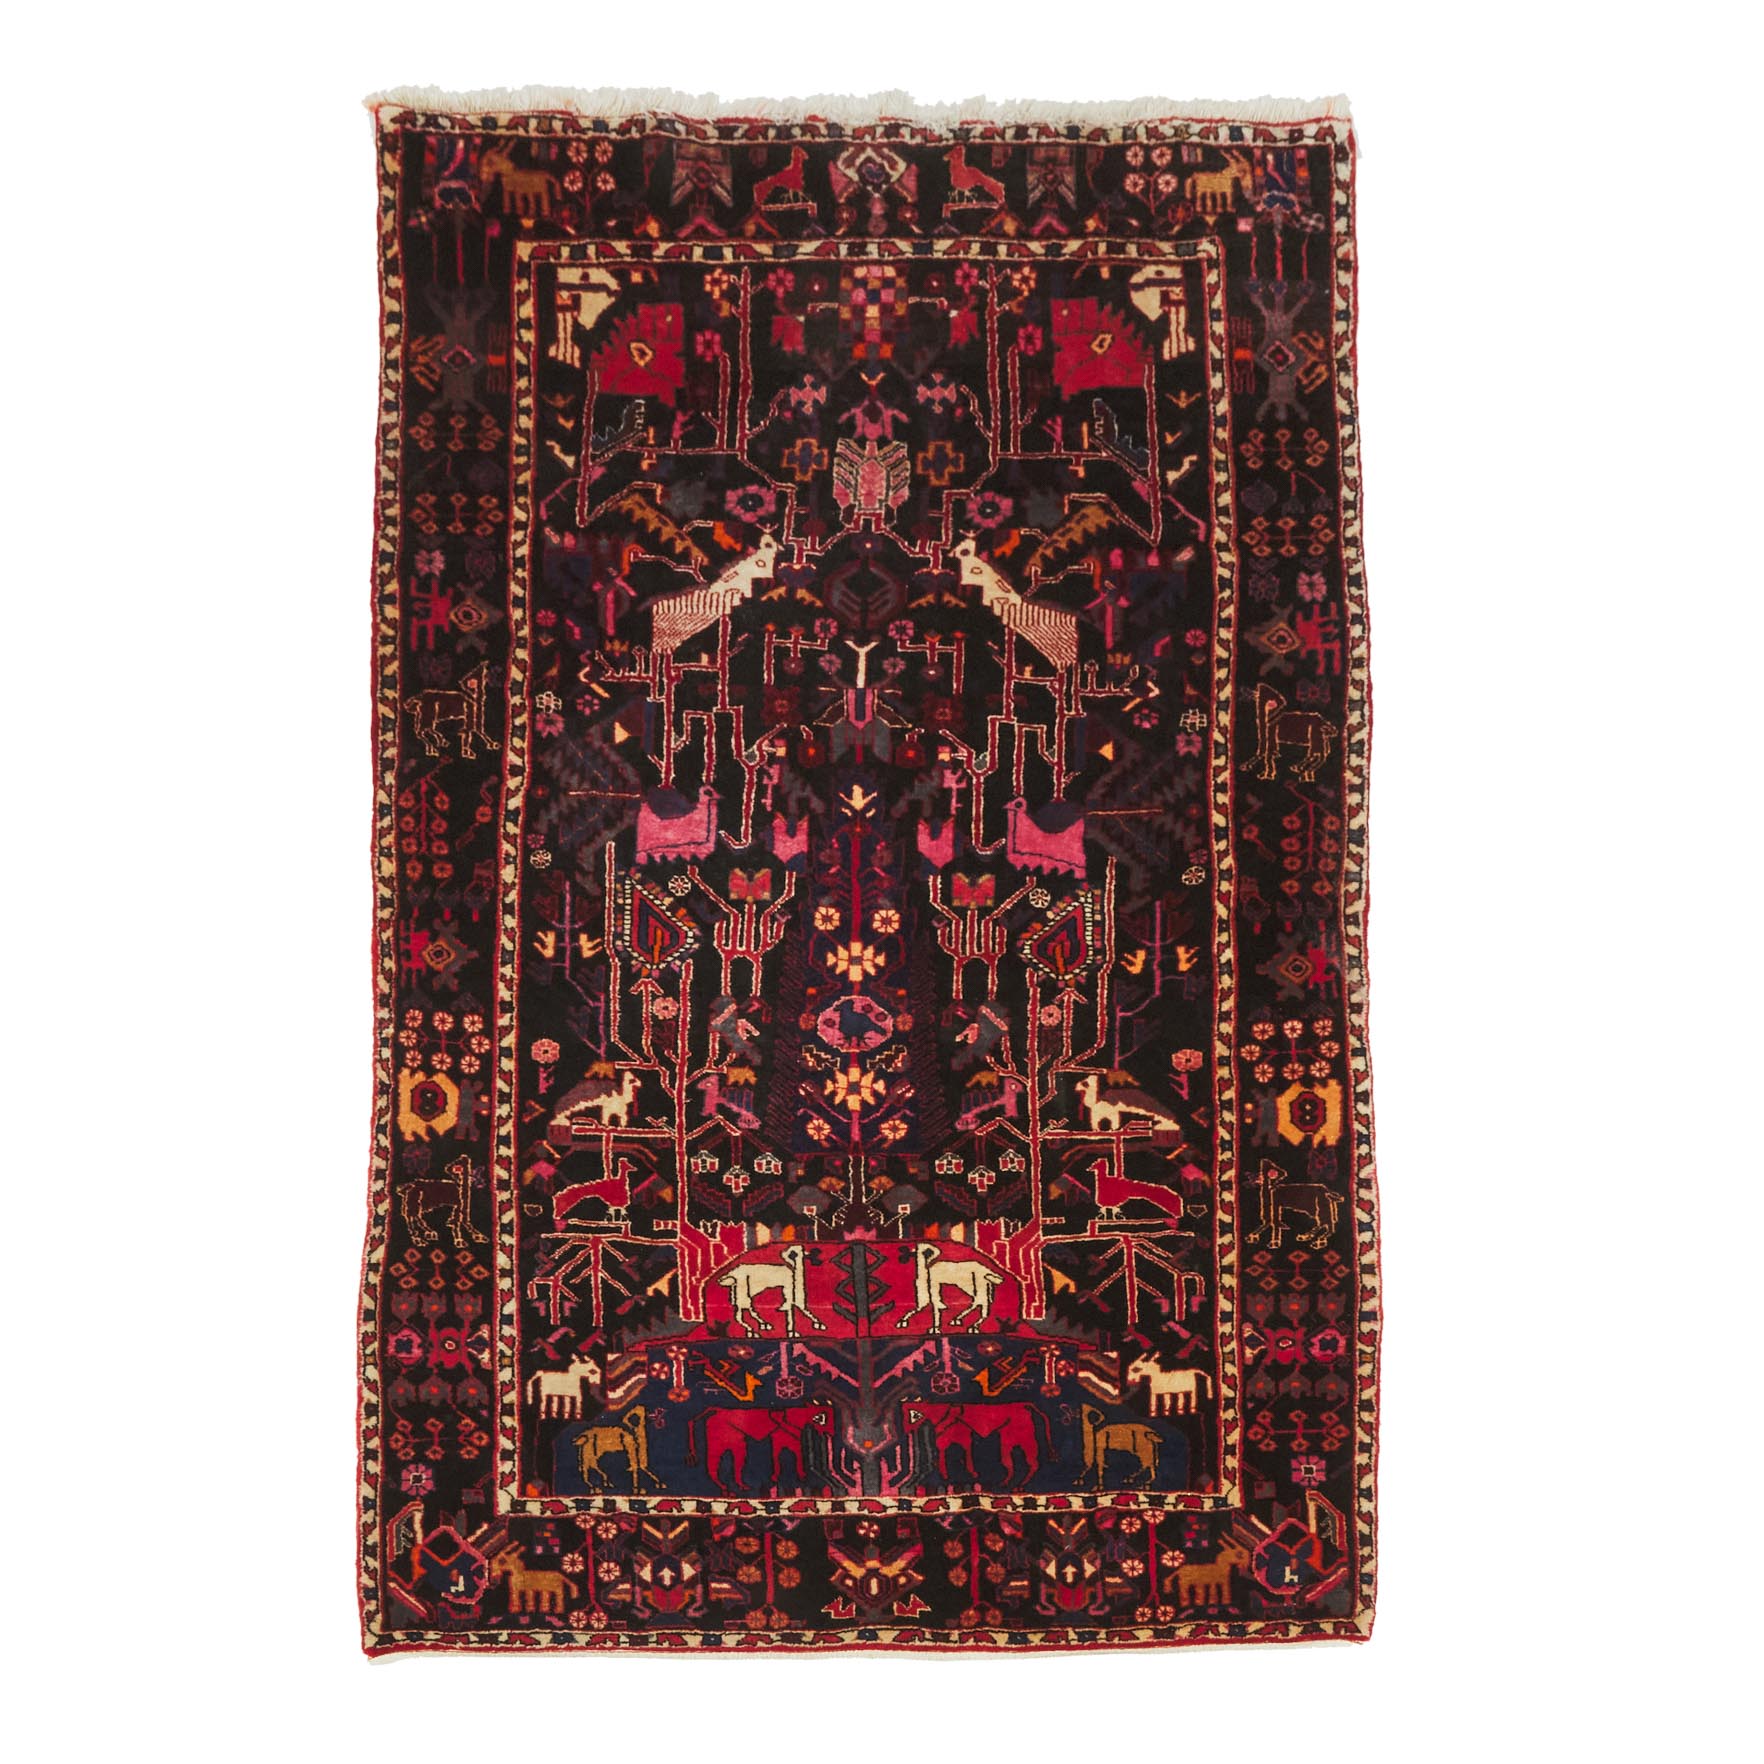 Malayer Pictorial Rug, Persian, c.1970/80